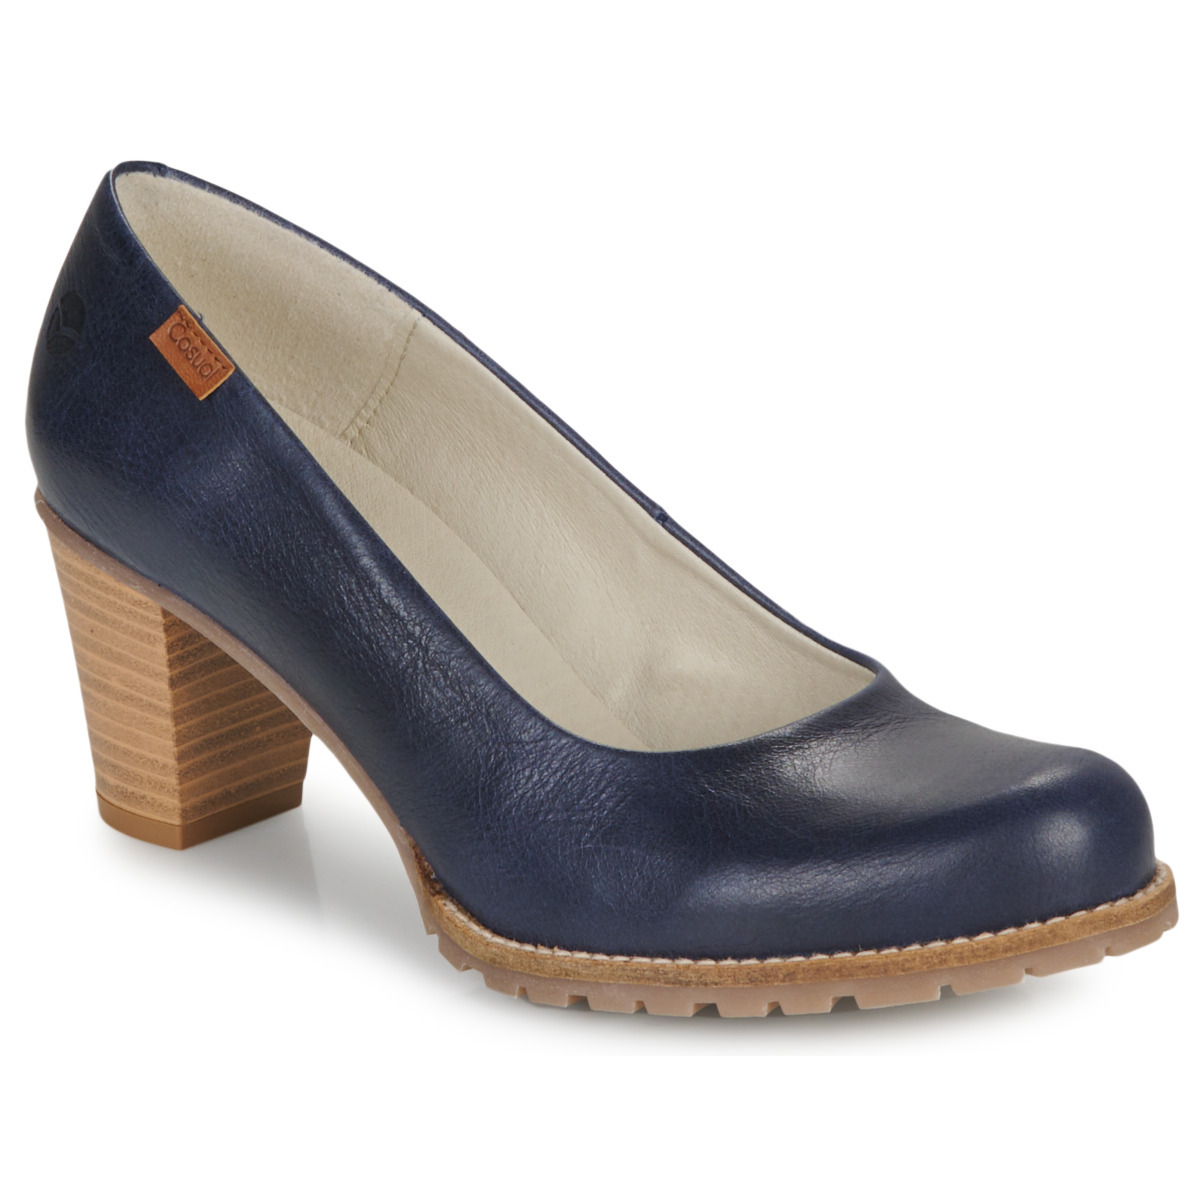 Spartoo - Blue Pumps for Women from Casualtitude GOOFASH